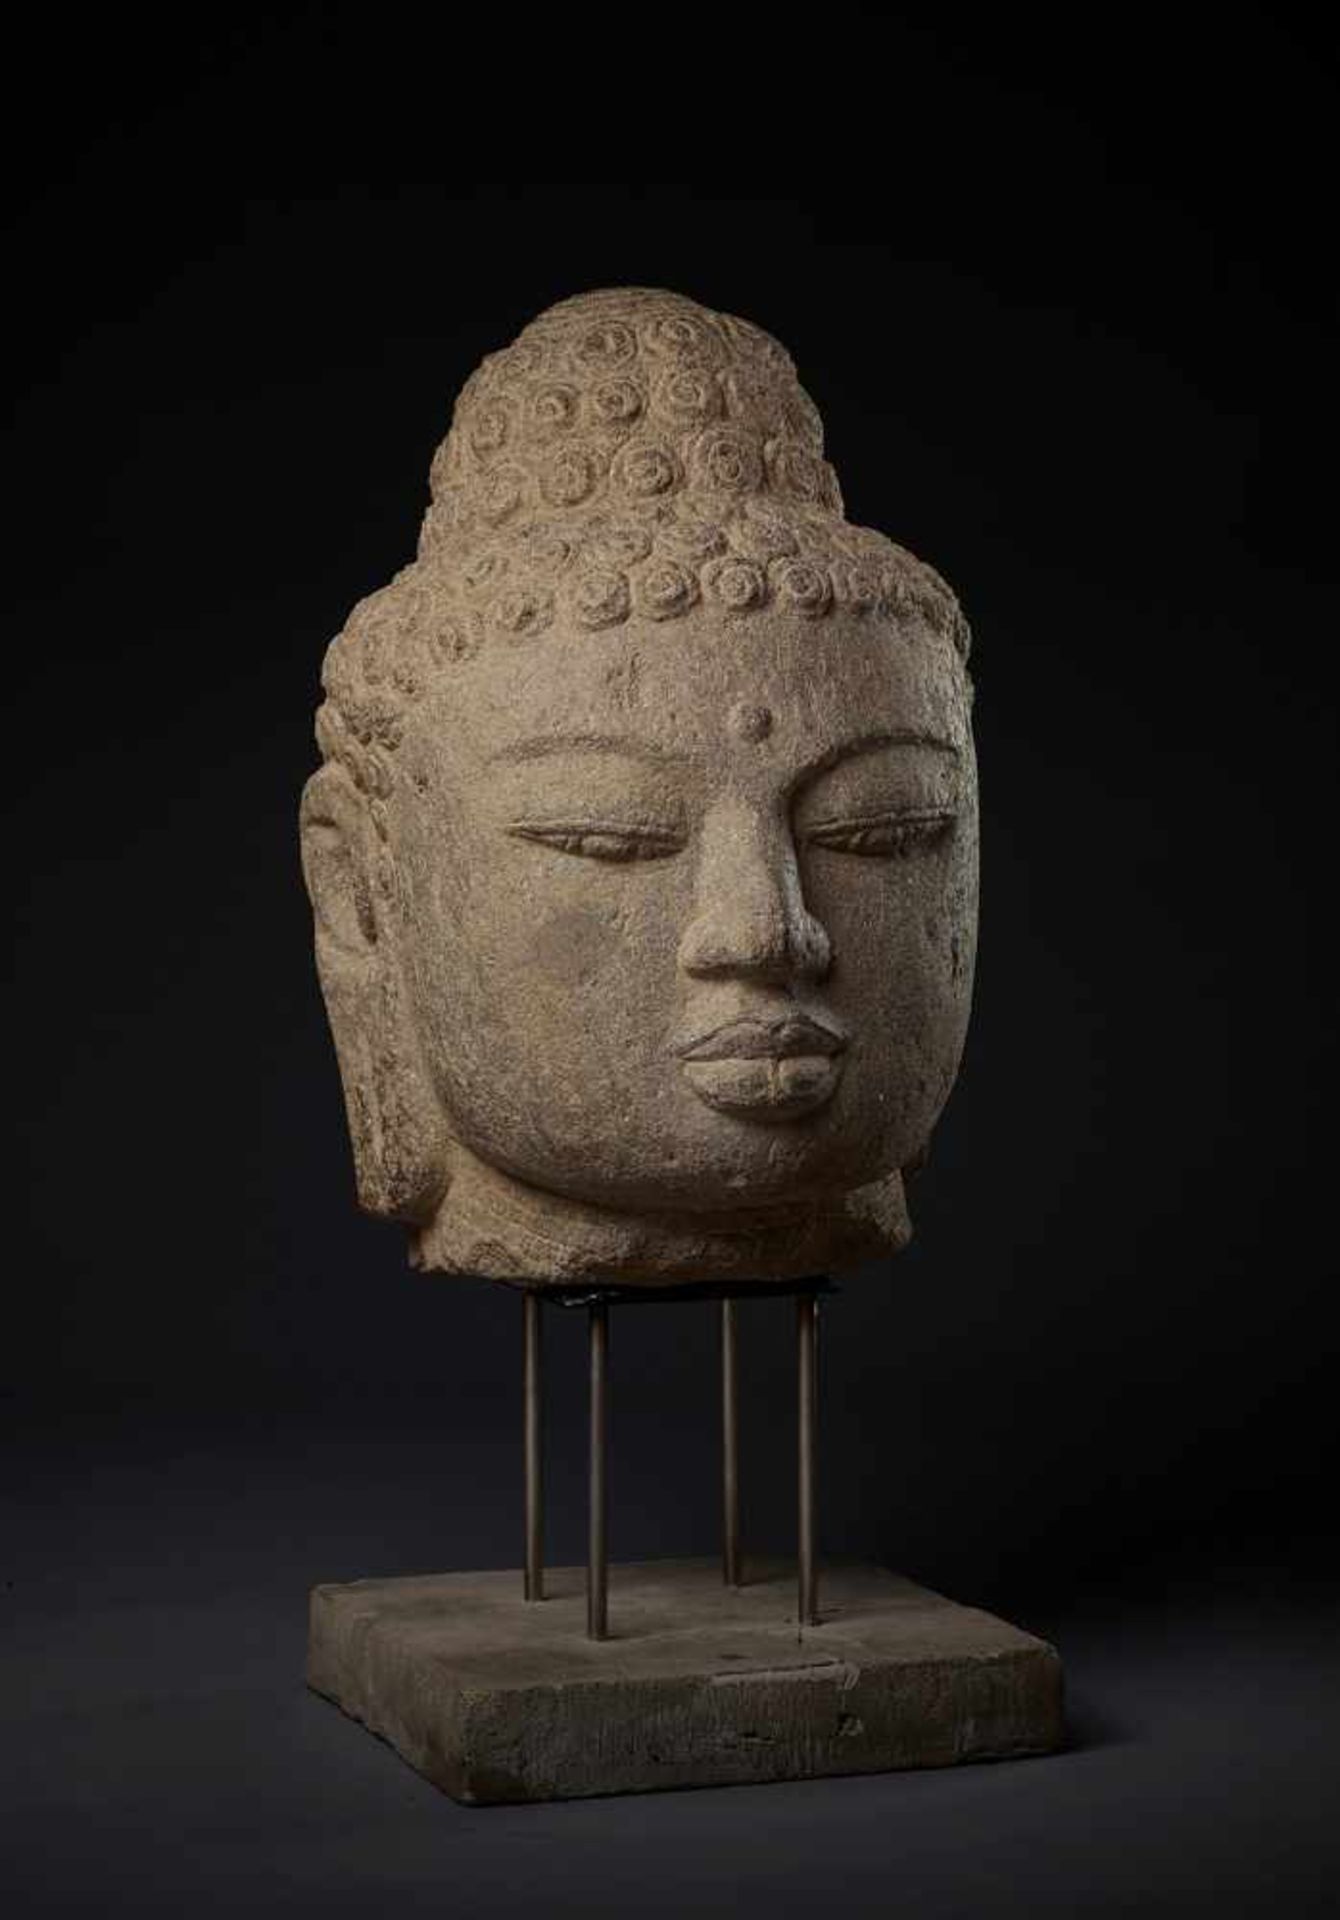 A LARGE AND IMPORTANT ANDESITE HEAD OF BUDDHA Indonesia, Central Java, 9th-10th century. Finely